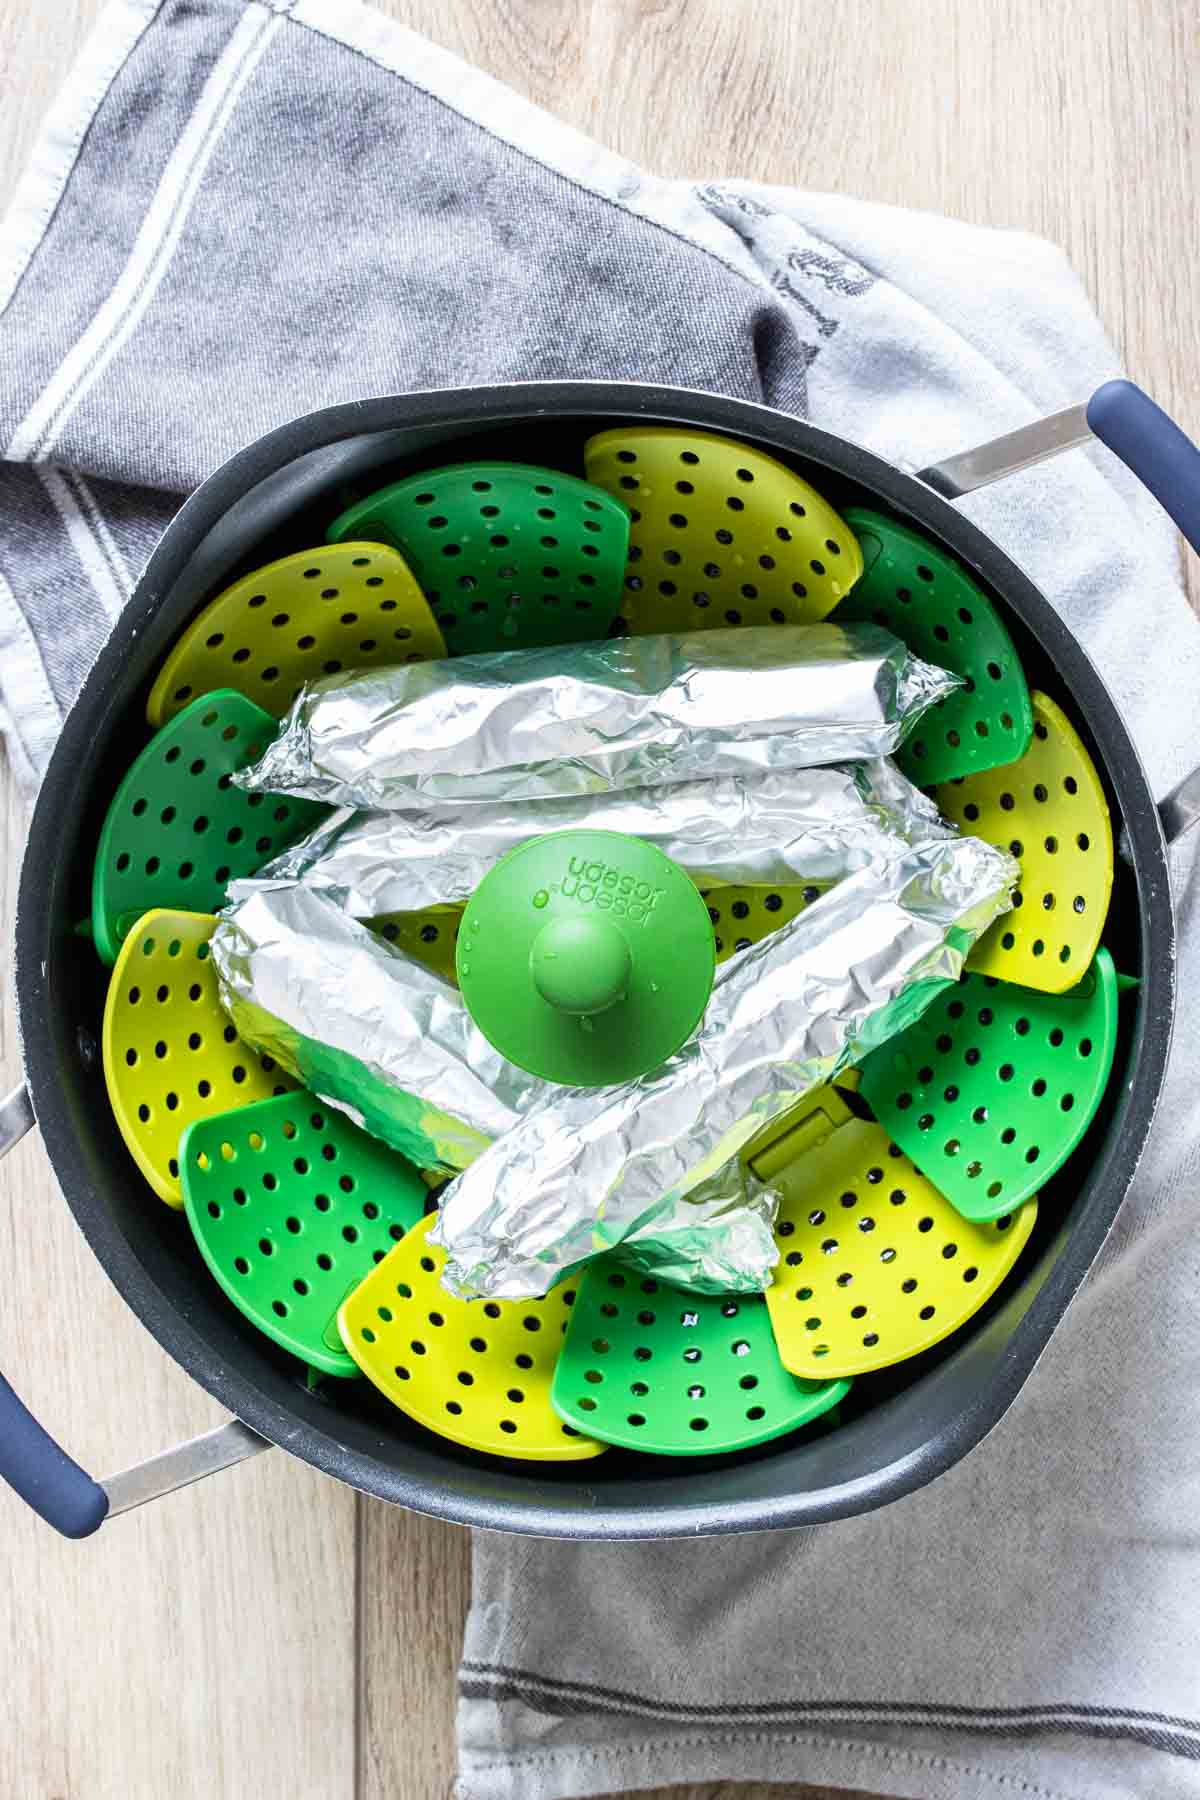 Top view of a green and yellow steamer basket in a black pot with four foil wrapped sausages in it.